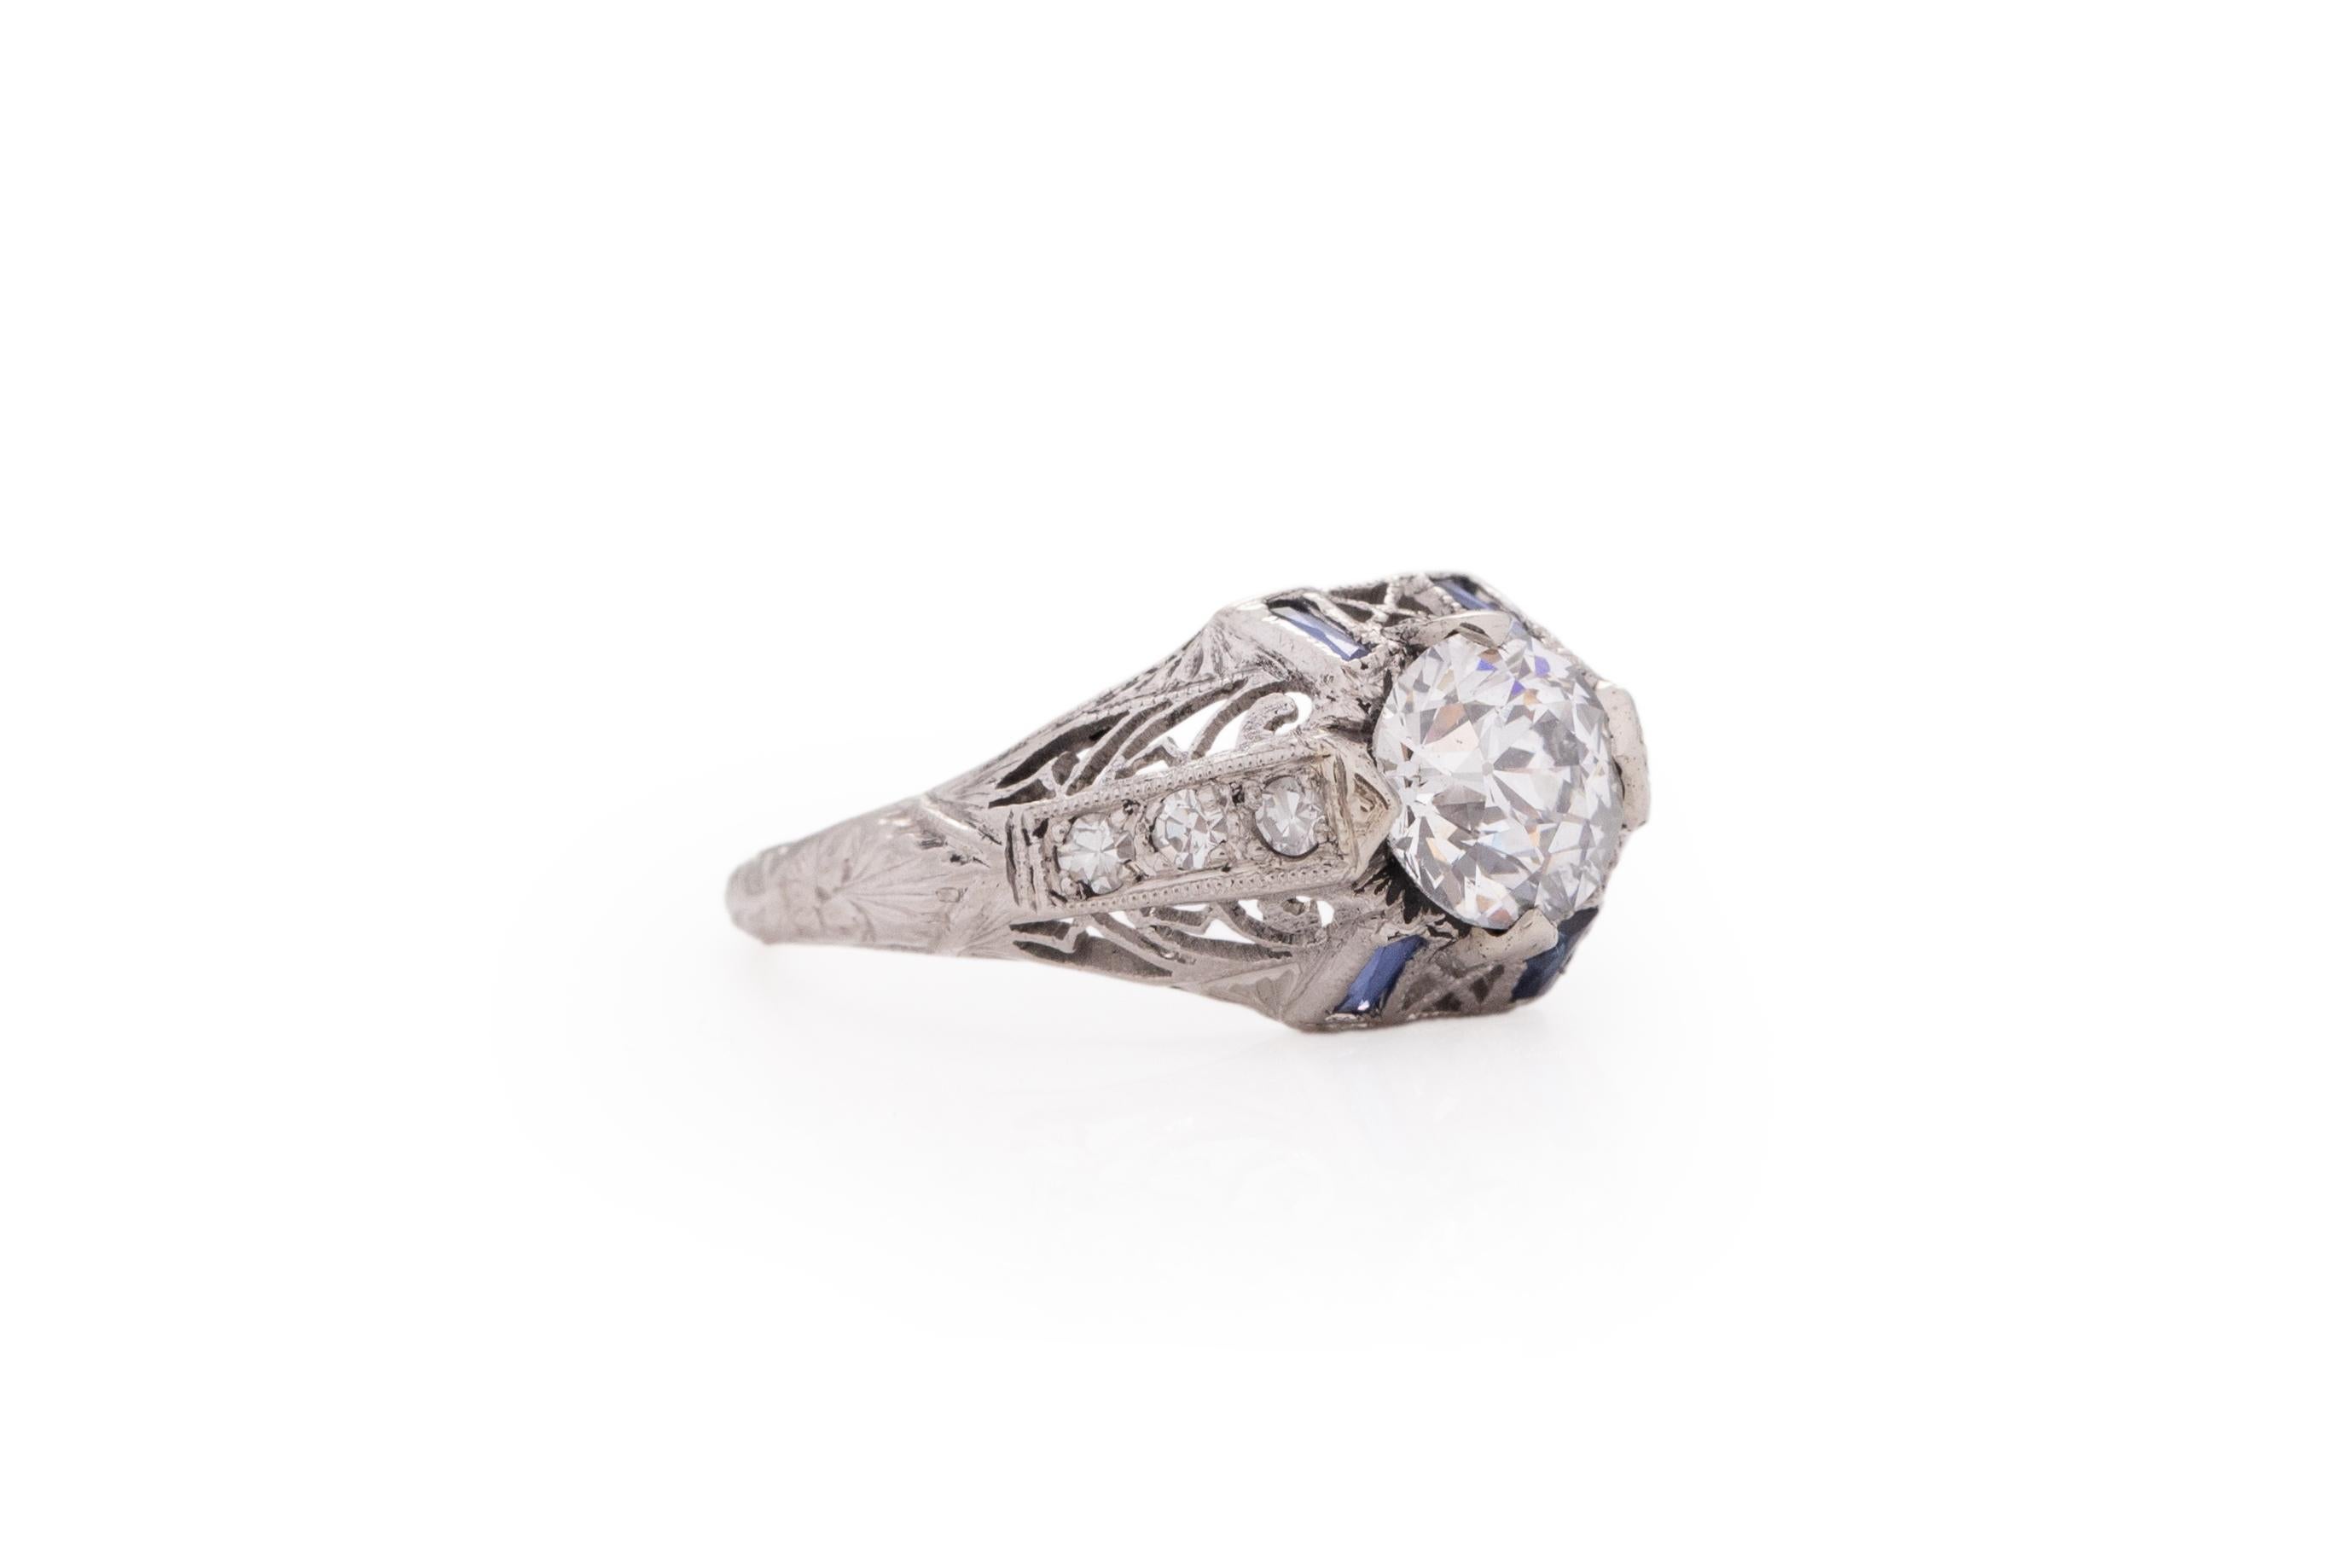 Ring Size: 4.25
Metal Type: Platinum [Hallmarked, and Tested]
Weight: 3.1 grams

Center Diamond Details:
GIA REPORT #:6217737664
Weight: .82 carat
Cut: Old European brilliant
Color: E
Clarity: SI2
Measurements: 6.05mm x 5.93 x 3.85

Side Stone